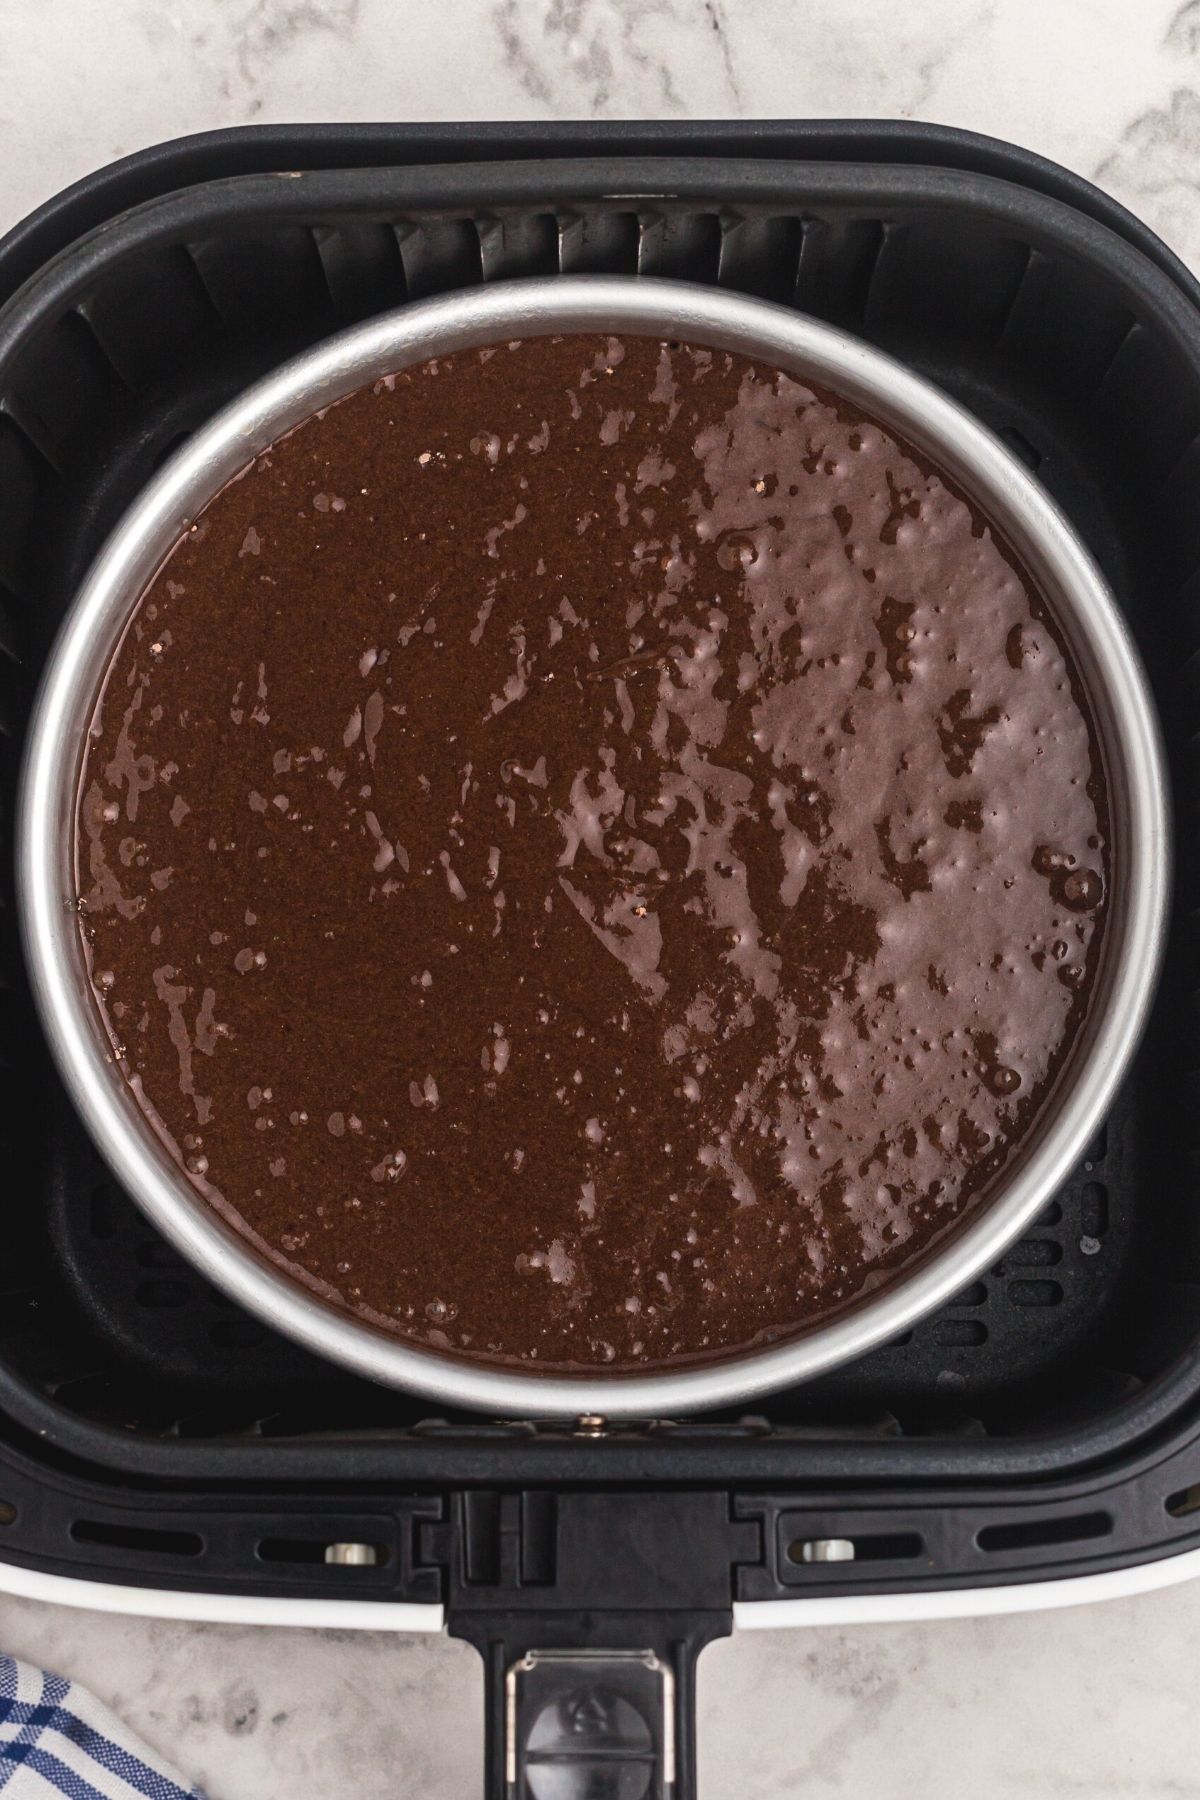 Uncooked cake mix in pan, in an air fryer basket.